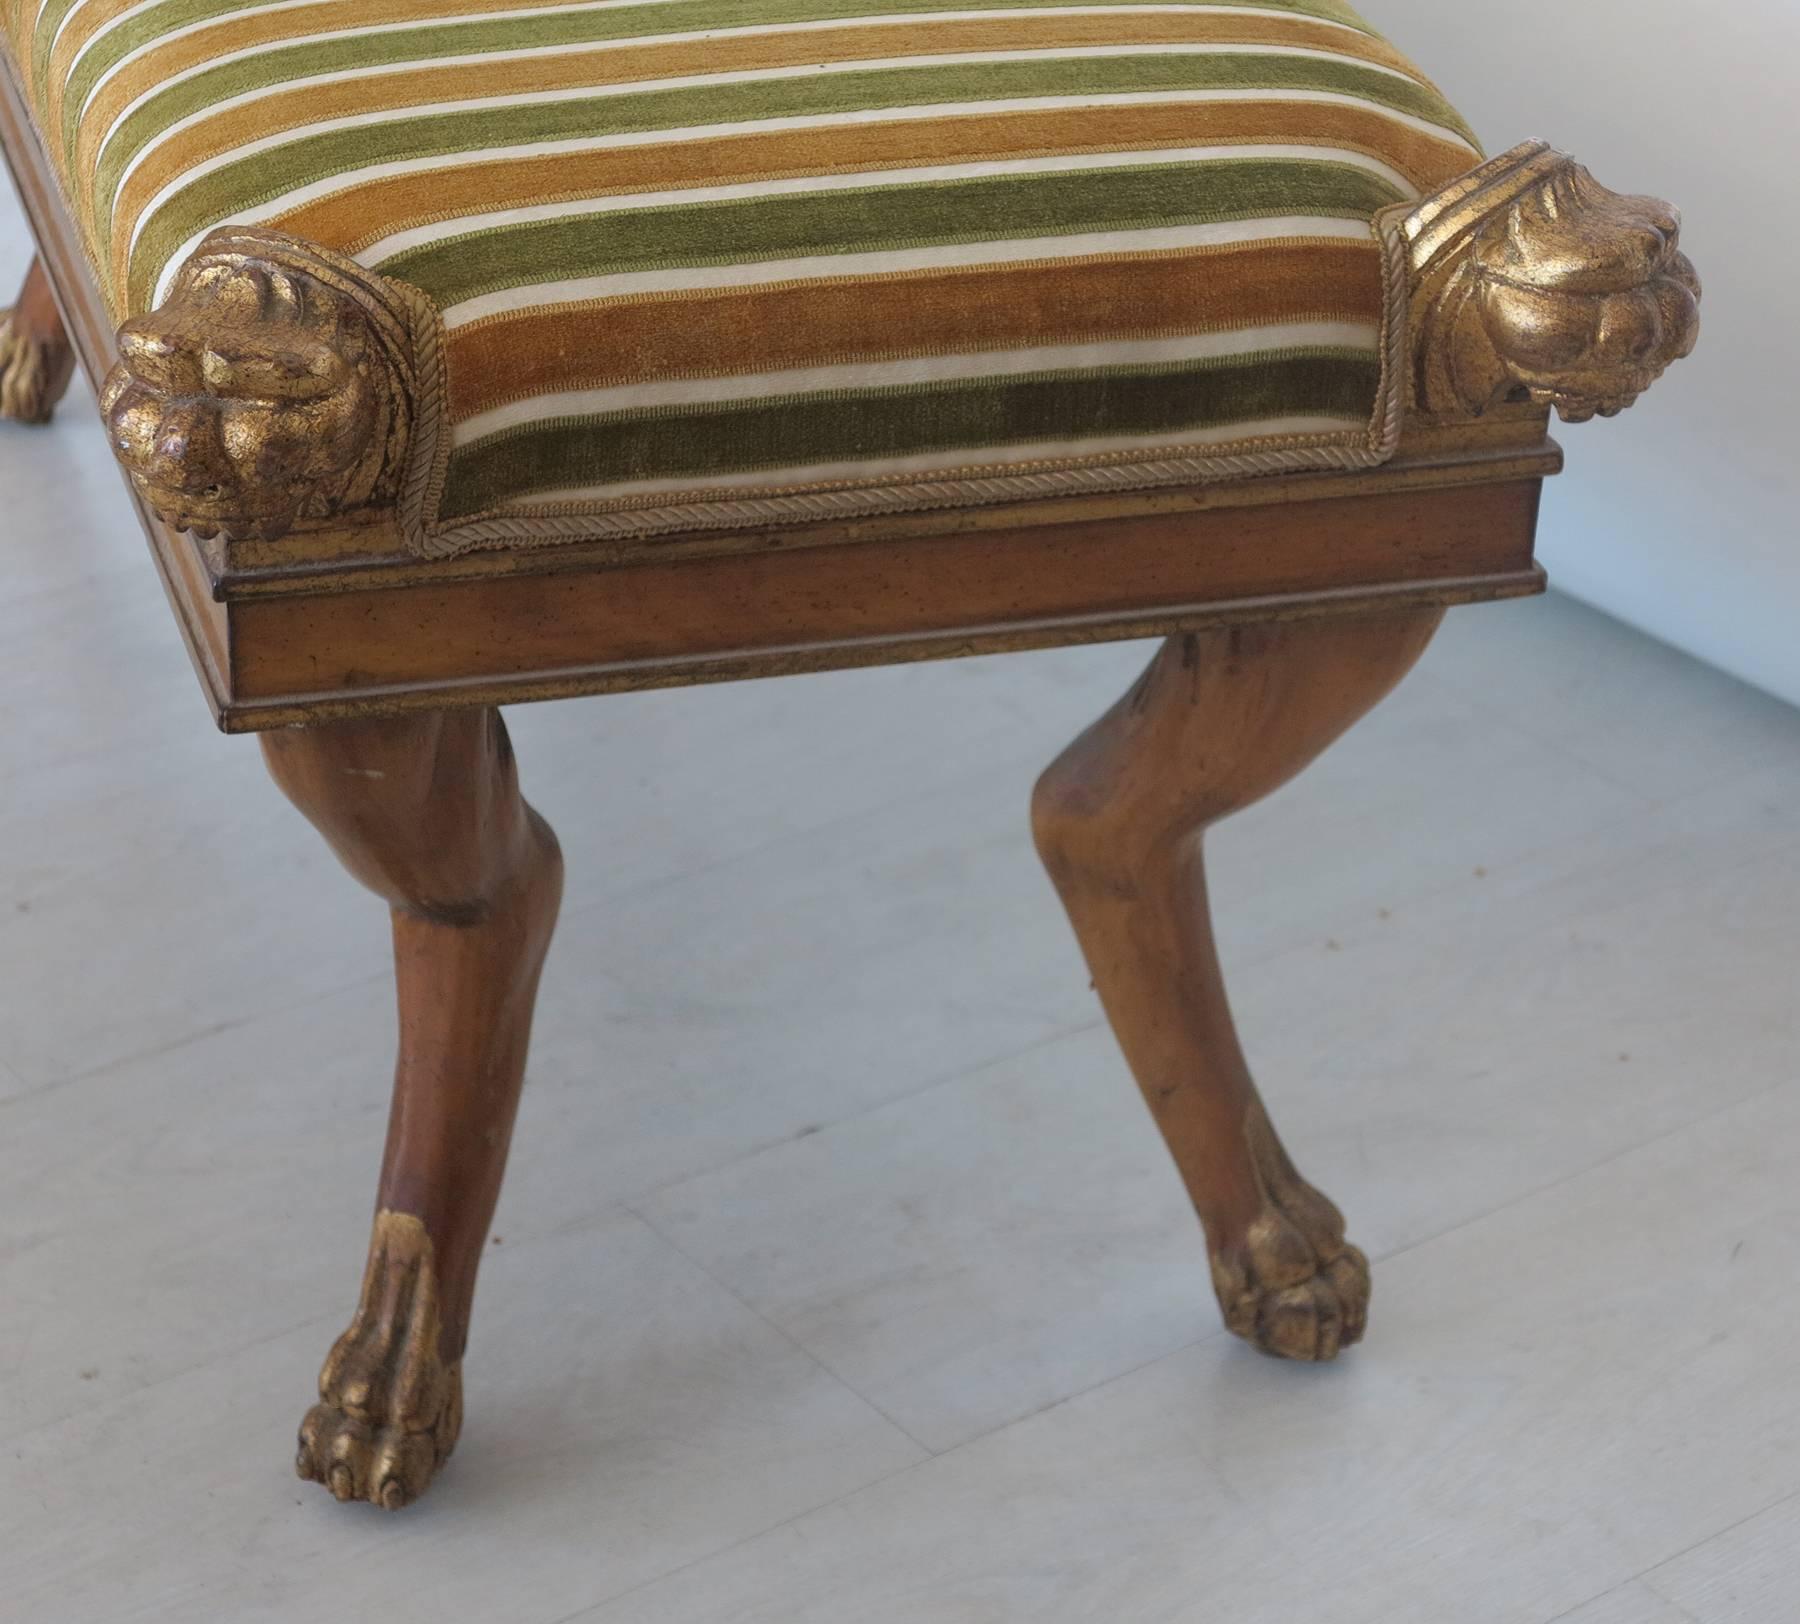 Foot of the bed bench or decorative overflow seating. Striped upholstered top is in excellent condition. Retains the original finish in intact condition.